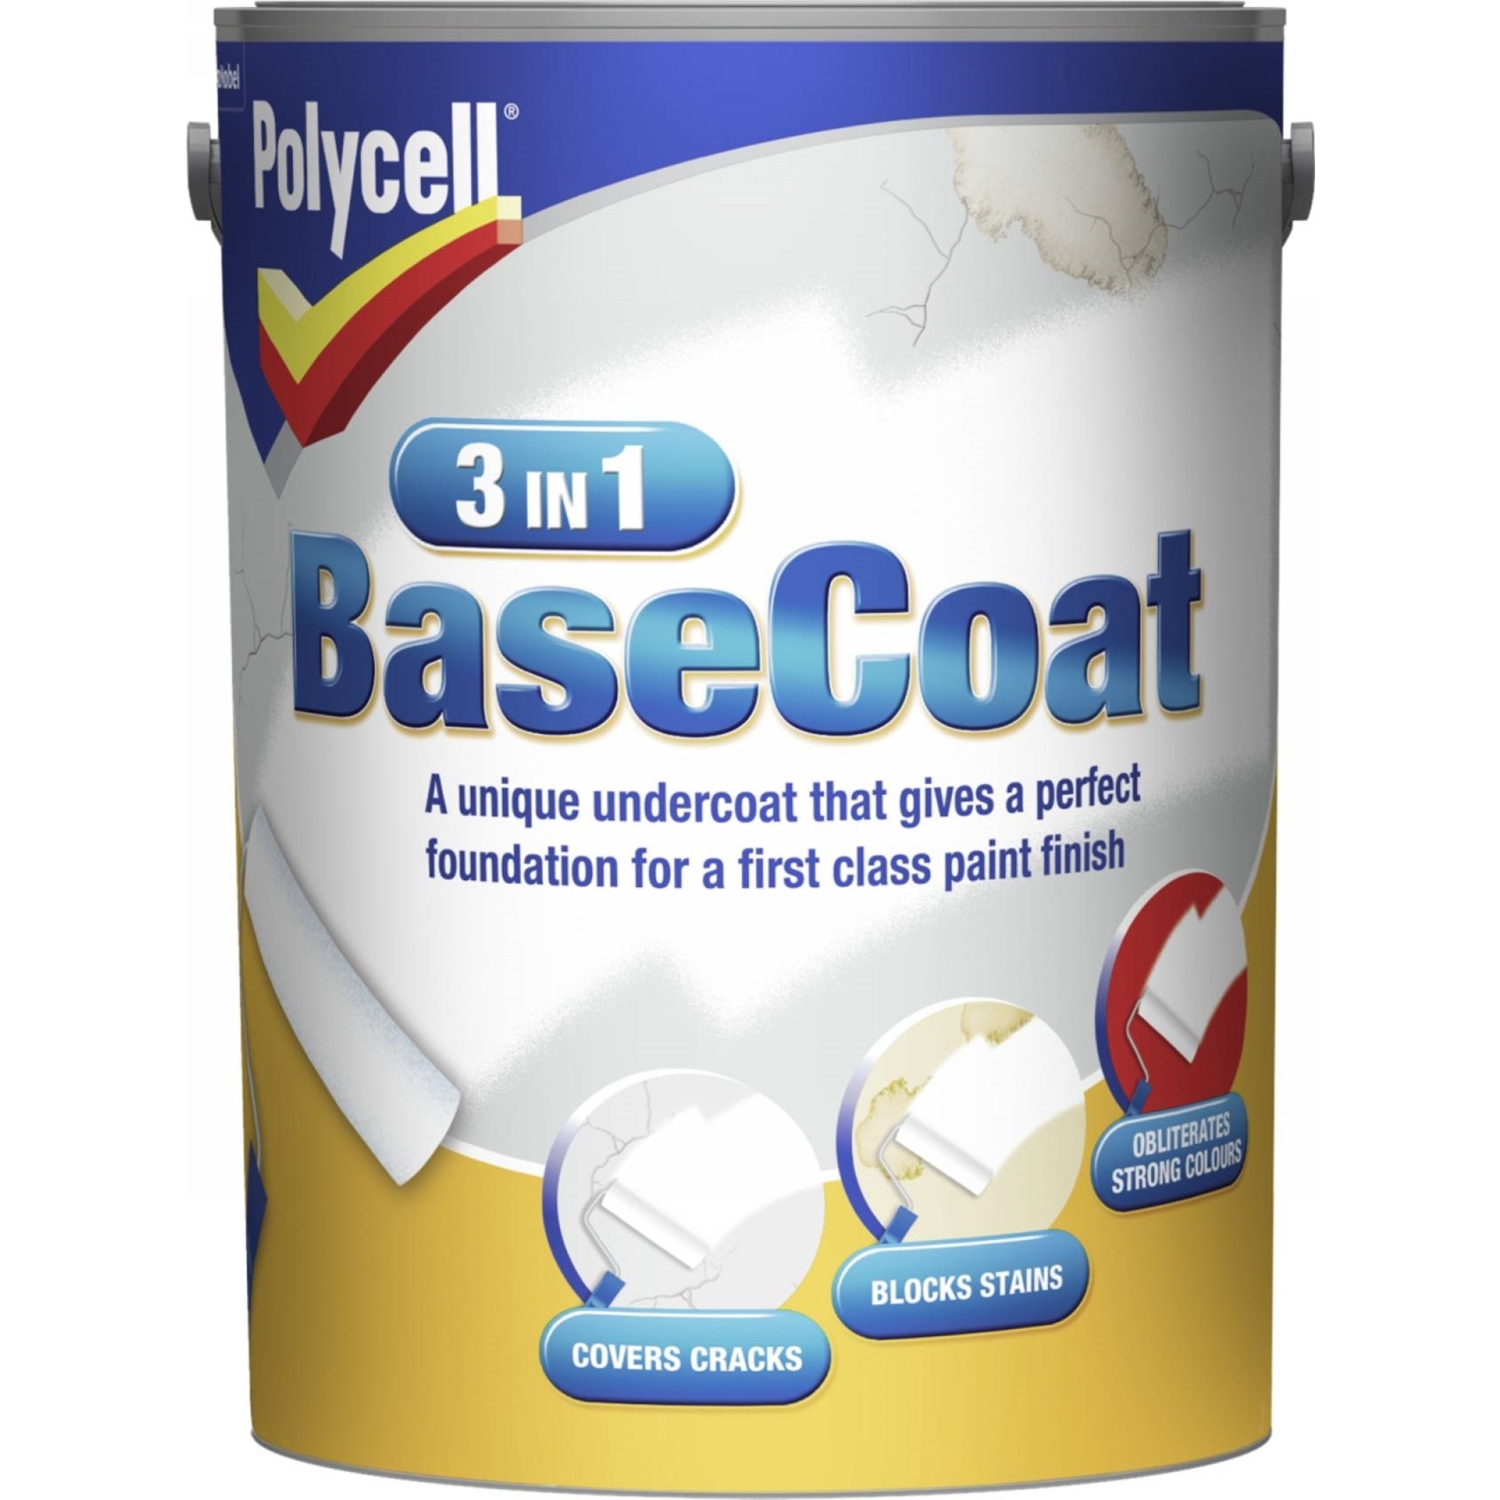 Polycell 3-in-1 Basecoat - 5l Image